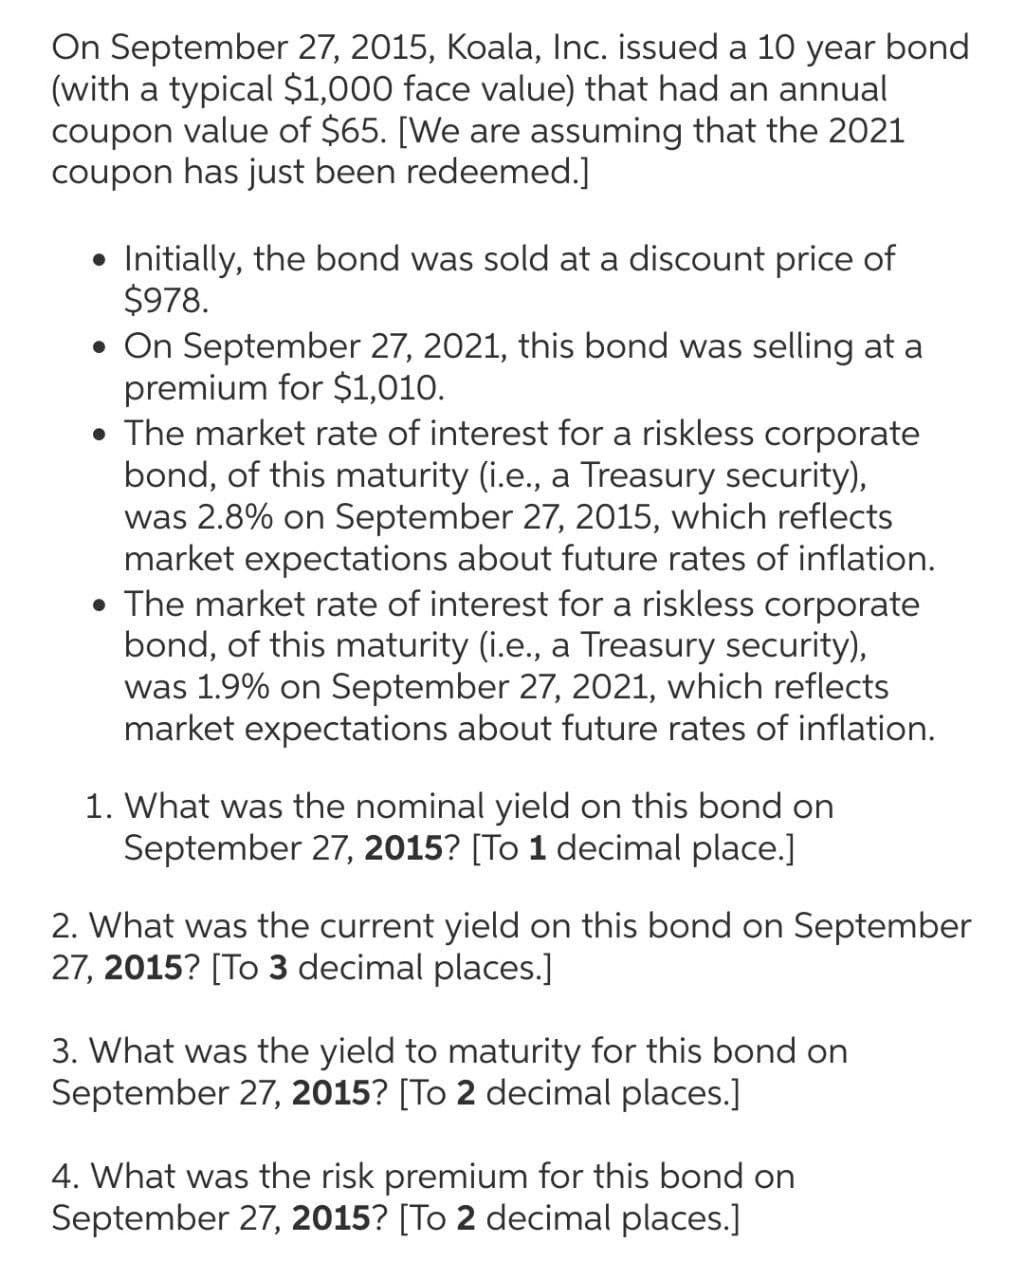 On September 27, 2015, Koala, Inc. issued a 10 year bond
(with a typical $1,000 face value) that had an annual
coupon value of $65. [We are assuming that the 2021
coupon has just been redeemed.]
Initially, the bond was sold at a discount price of
$978.
• On September 27, 2021, this bond was selling at a
premium for $1,010.
• The market rate of interest for a riskless corporate
bond, of this maturity (i.e., a Treasury security),
was 2.8% on September 27, 2015, which reflects
market expectations about future rates of inflation.
• The market rate of interest for a riskless corporate
bond, of this maturity (i.e., a Treasury security),
was 1.9% on September 27, 2021, which reflects
market expectations about future rates of inflation.
1. What was the nominal yield on this bond on
September 27, 2015? [To 1 decimal place.]
2. What was the current yield on this bond on September
27, 2015? [To 3 decimal places.]
3. What was the yield to maturity for this bond on
September 27, 2015? [To 2 decimal places.]
4. What was the risk premium for this bond on
September 27, 2015? [To 2 decimal places.]
